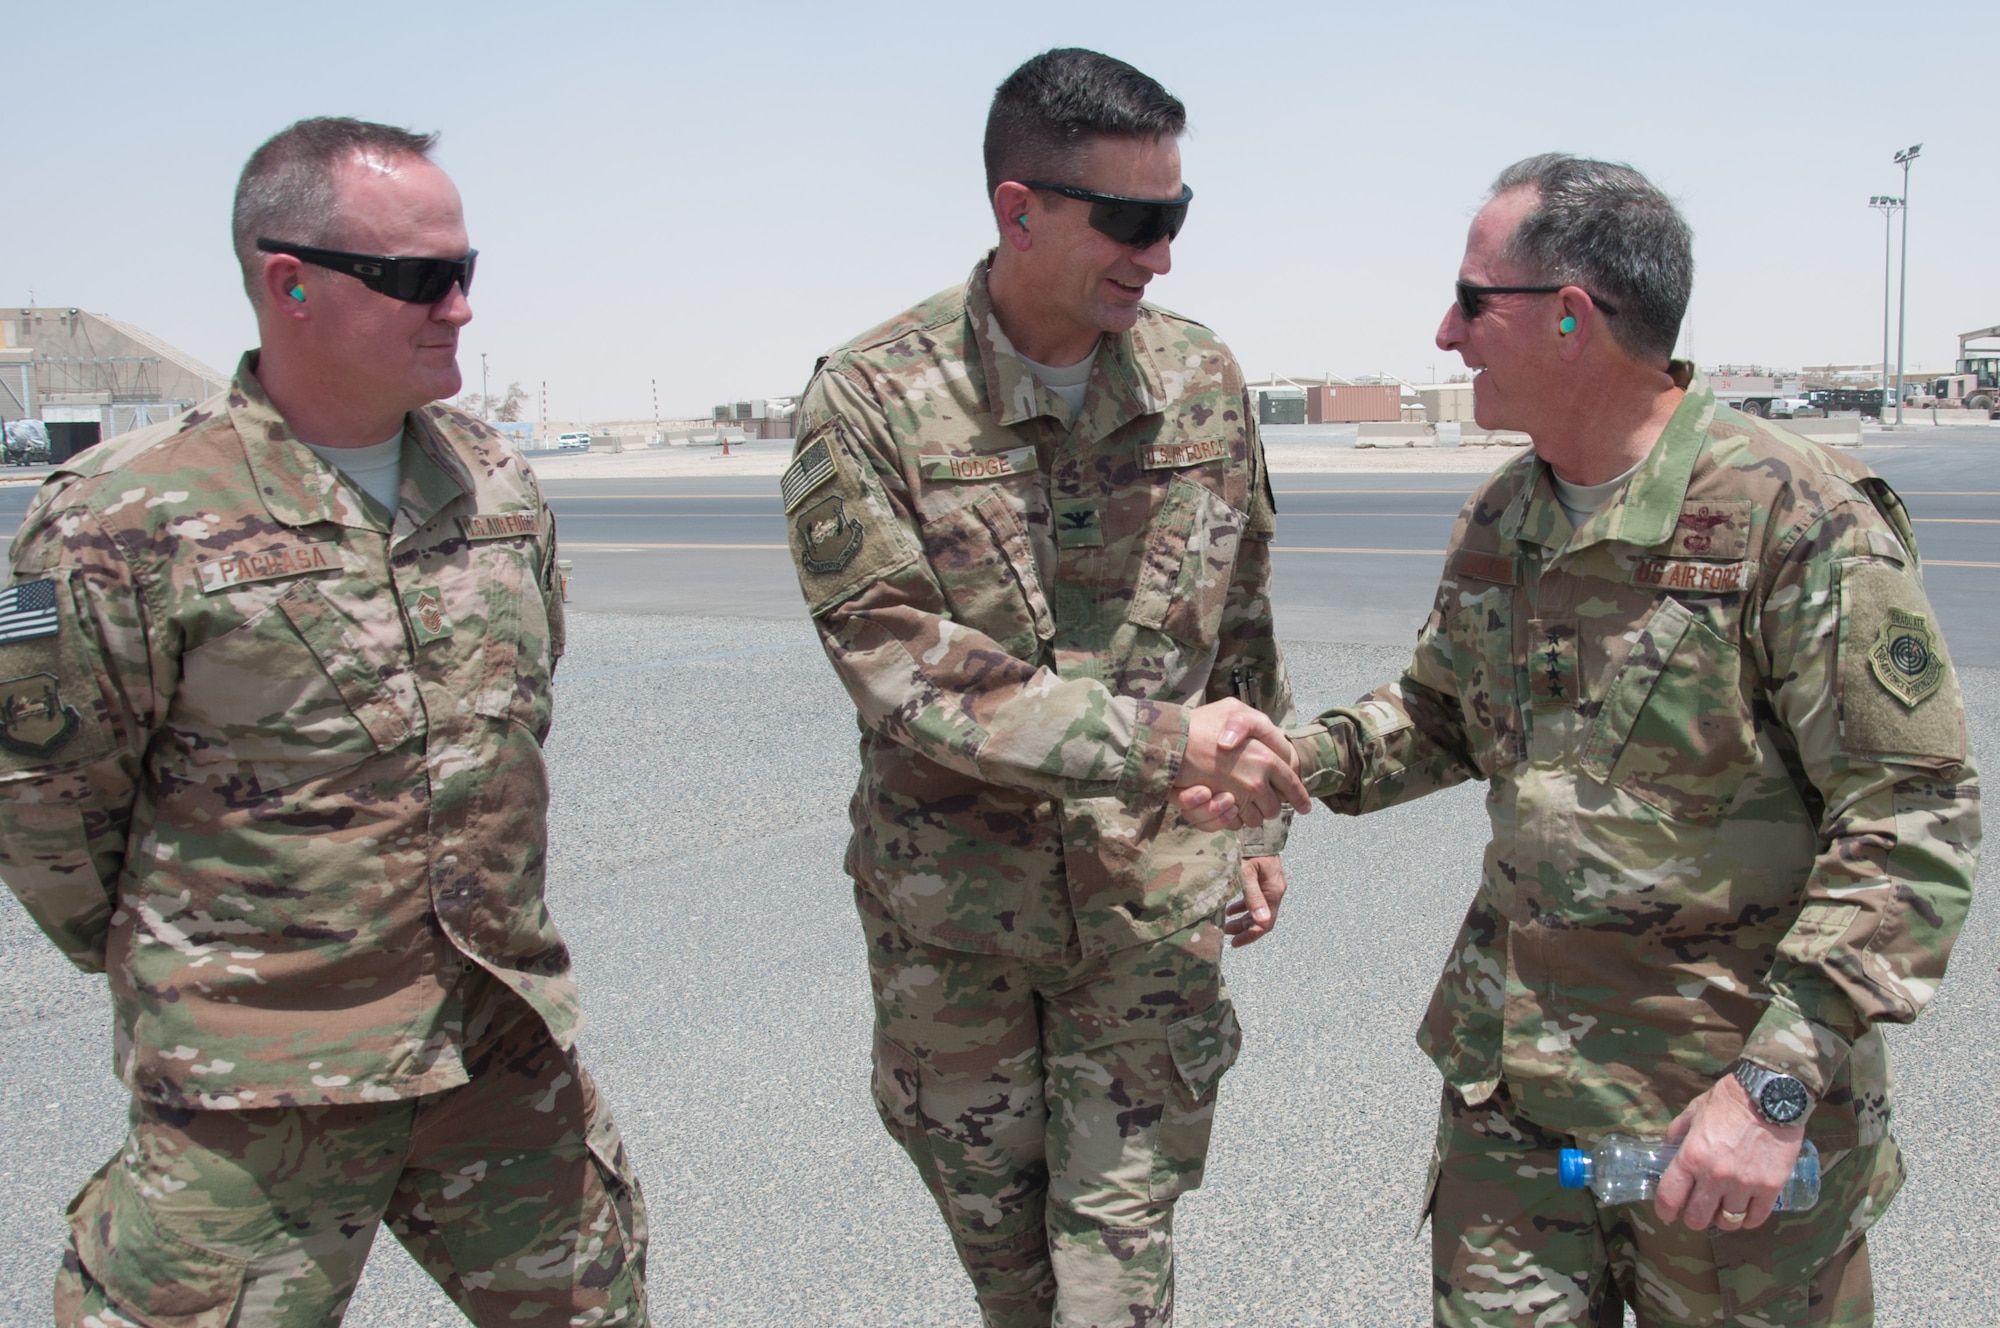 Goldfein traveled with Secretary of the Air Force Heather Wilson, visiting deployed Airmen assigned to the U.S. Air Forces Central Command area of responsibility.